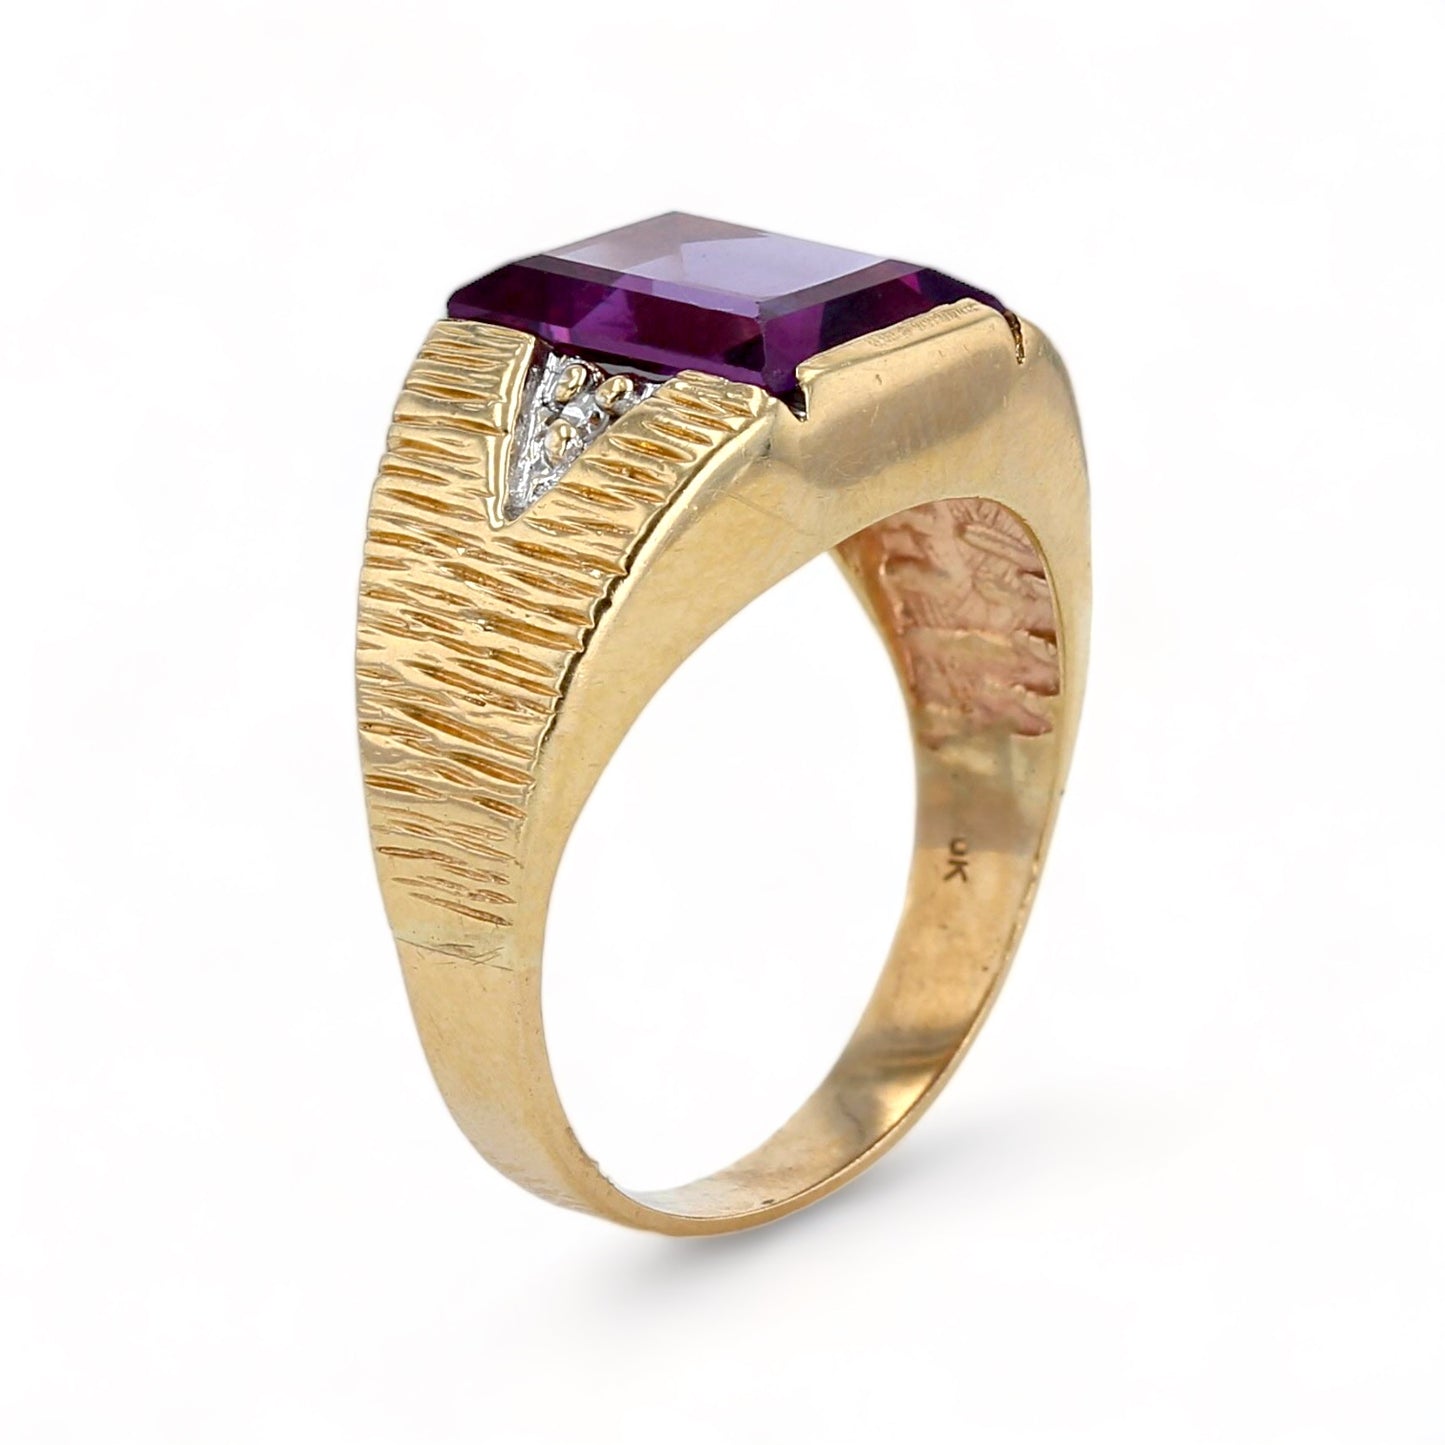 10K Yellow gold texture amethyst and diamonds statement ring-11368